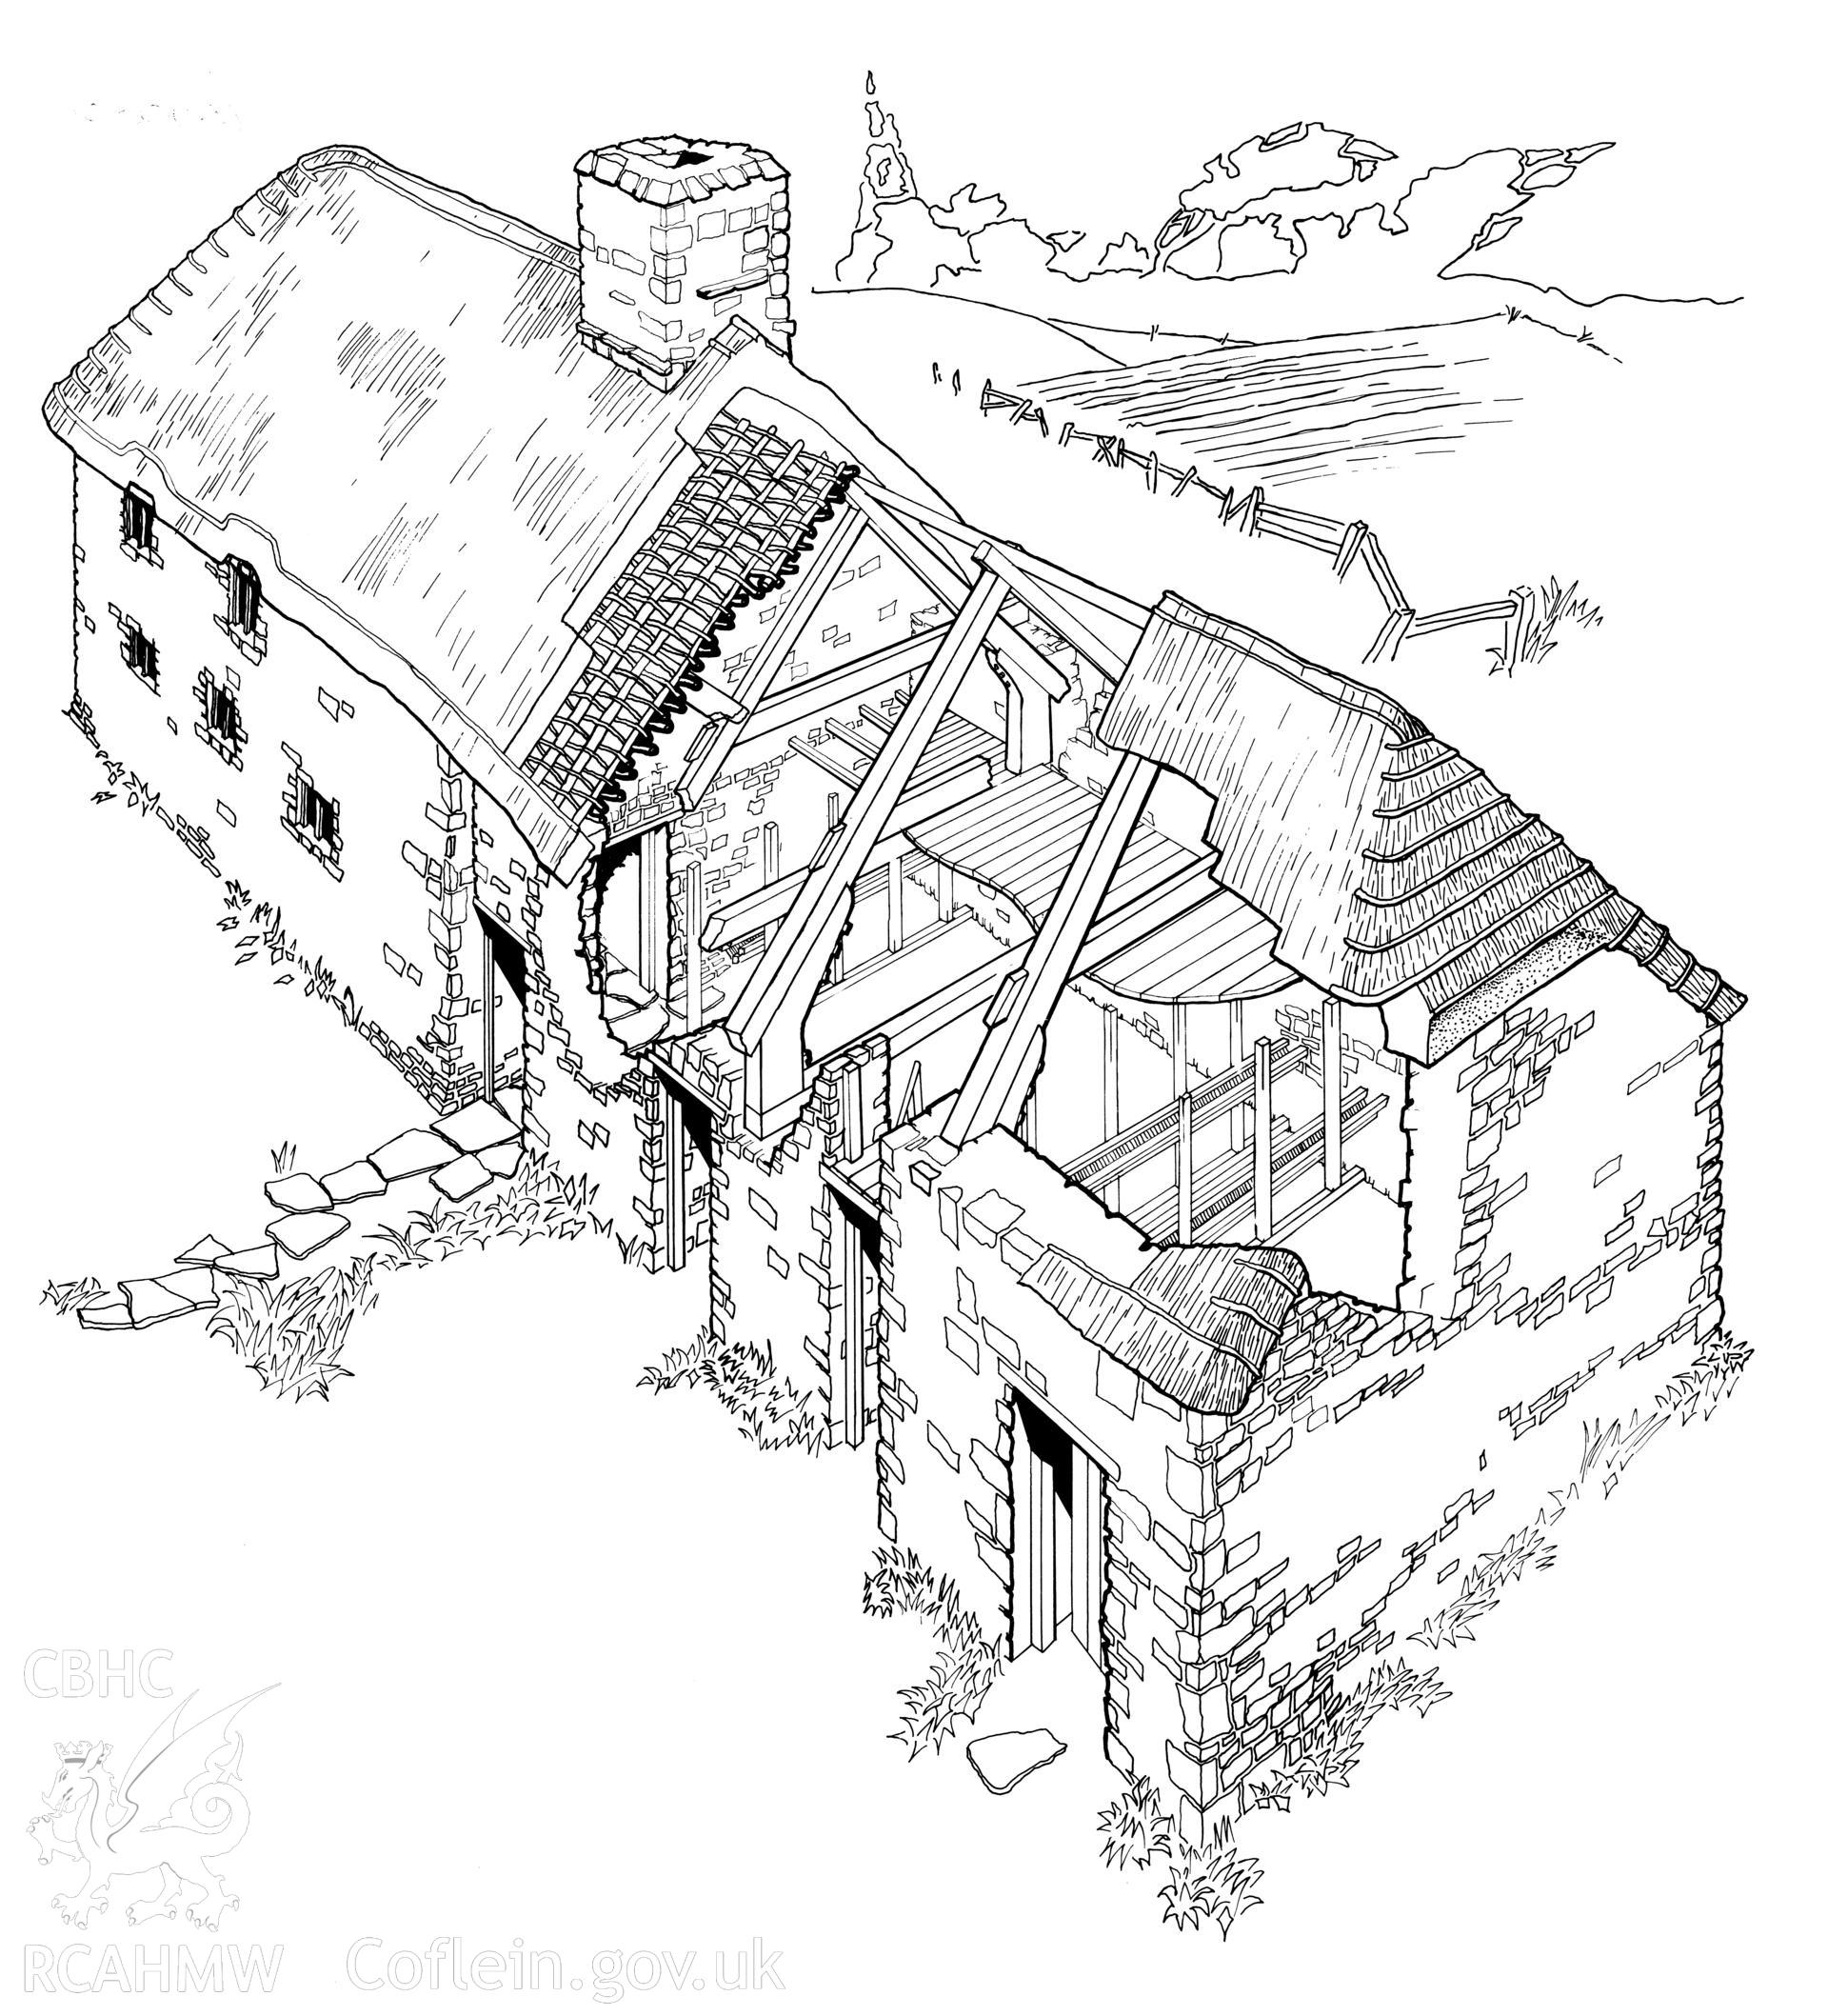 RCAHMW drawing (ink on linen) showing cutaway of Ty'r Celyn, Llandeilo, published in Houses of the Welsh Countryside, fig 108.